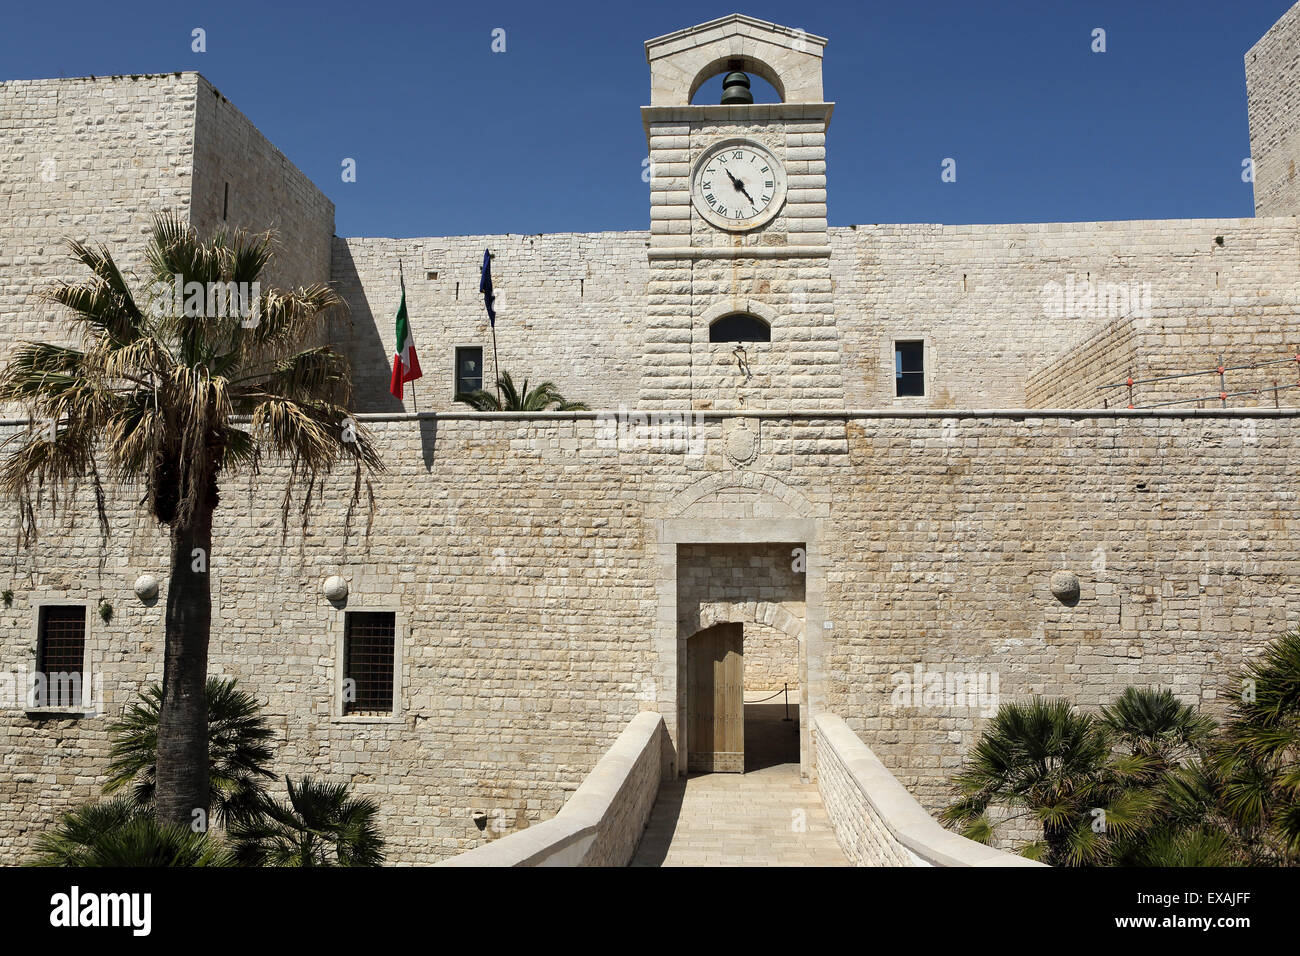 The gate of Castello Svevi, the 13th century castle built for King Frederick II, the Holy Roman Emperor, in Trani, Apulia, Italy Stock Photo